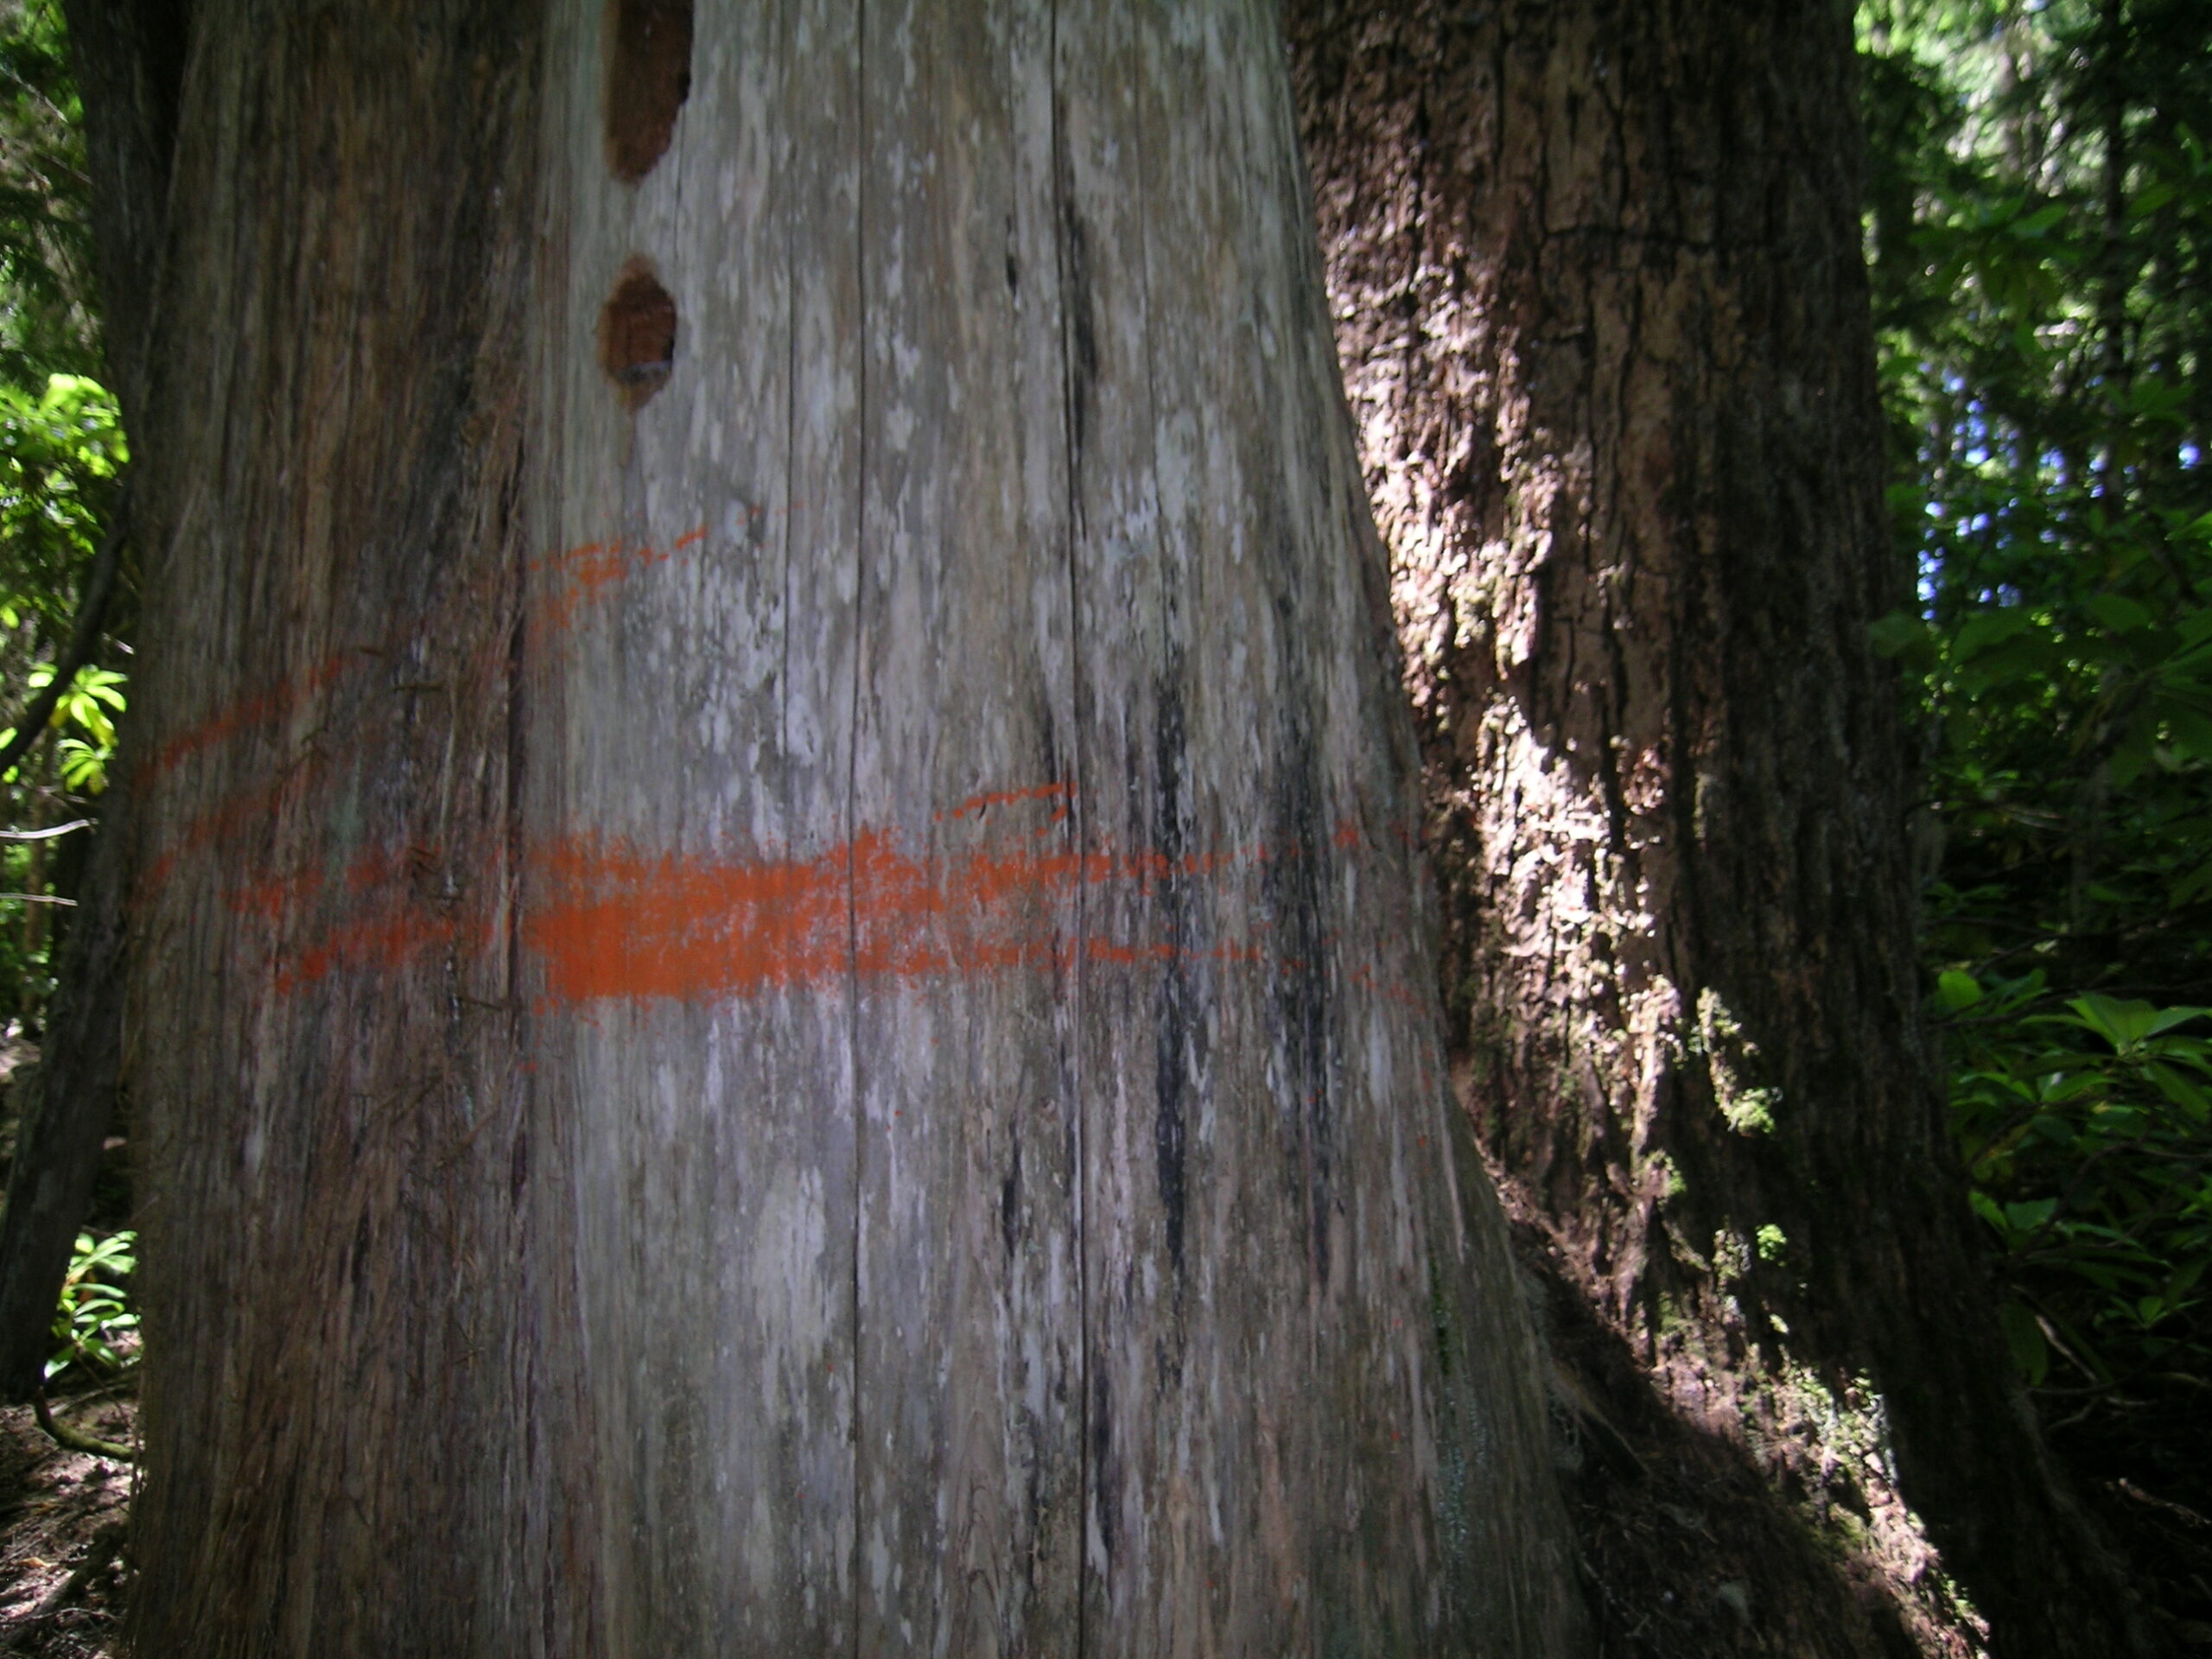 This is a close-up of an orange marked tree in the Slinky Timber Sale.